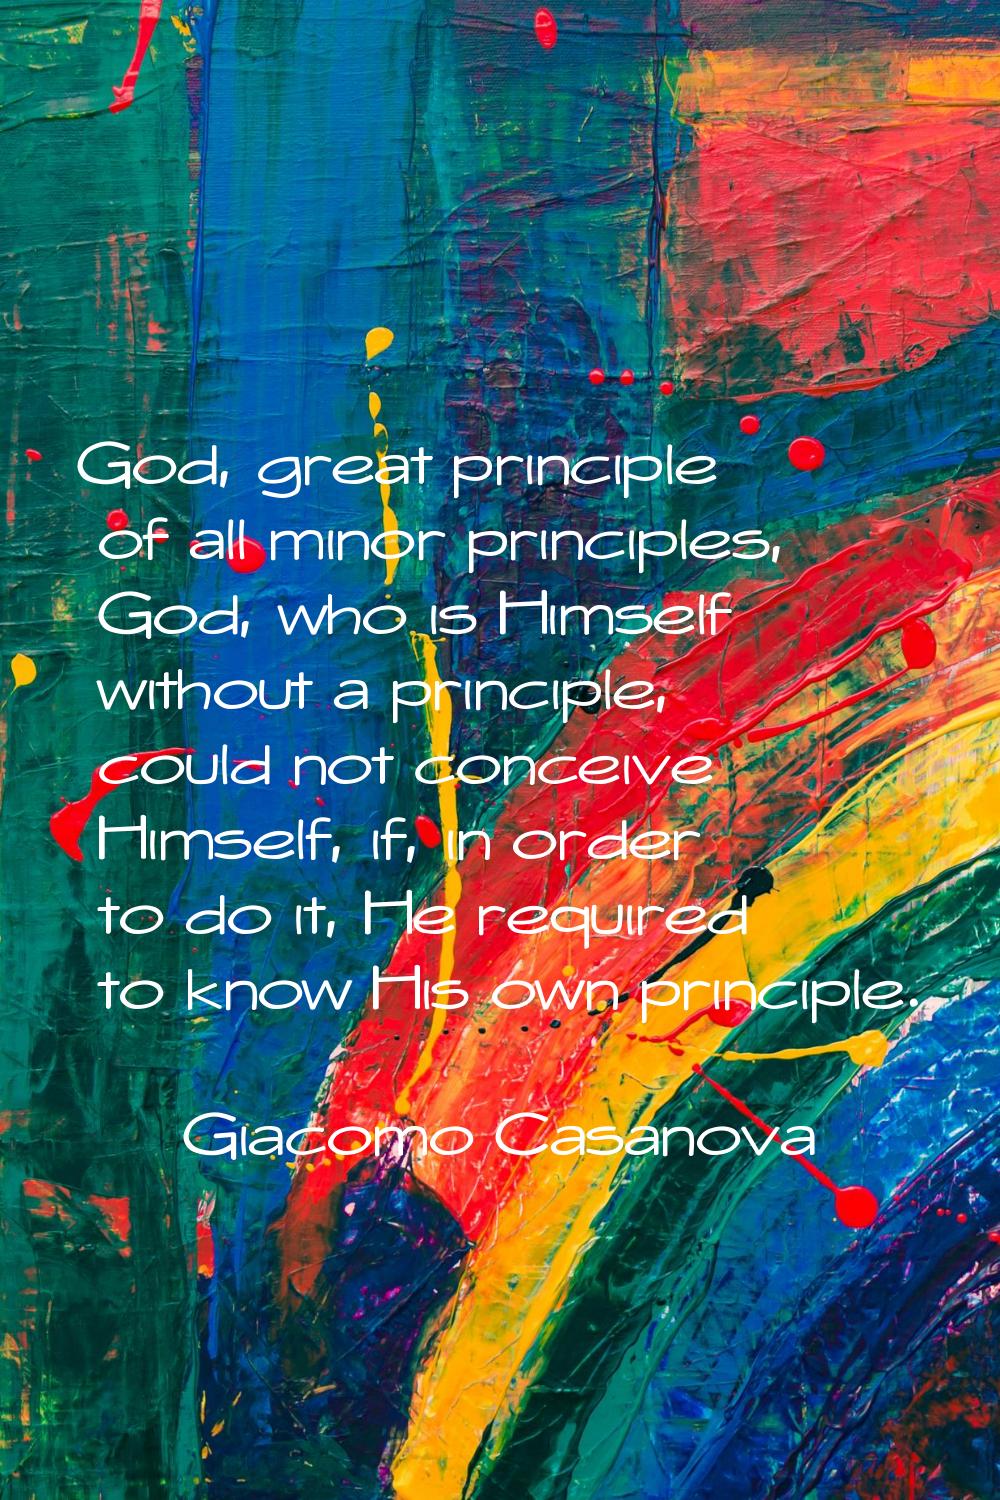 God, great principle of all minor principles, God, who is Himself without a principle, could not co